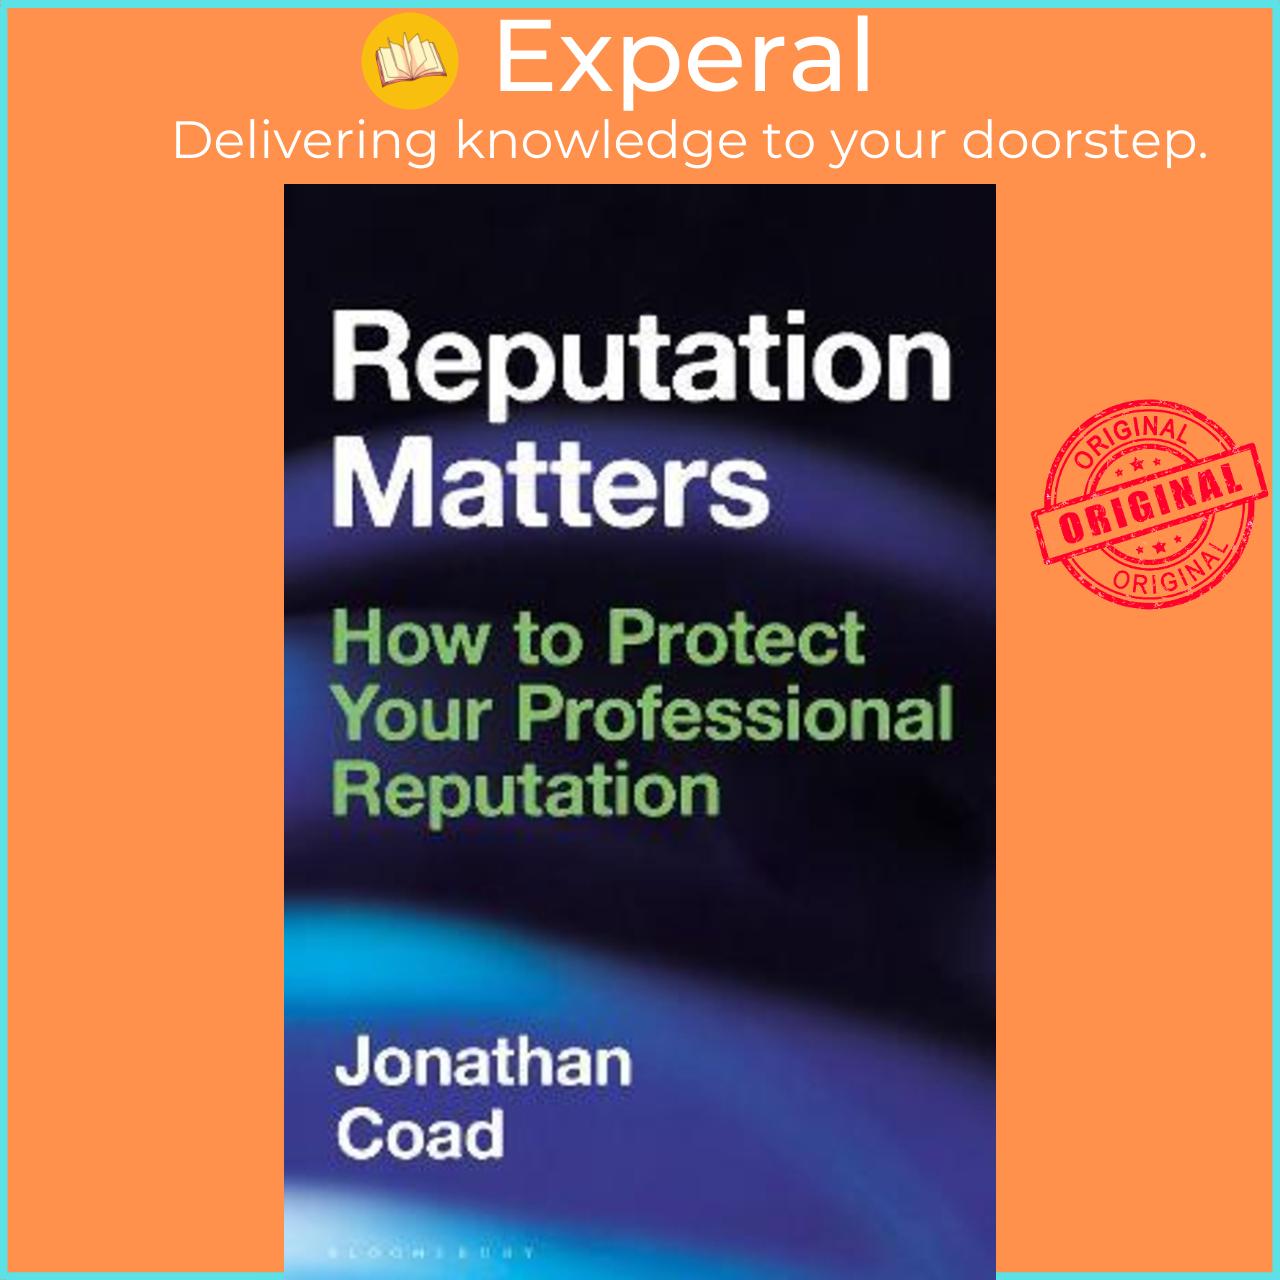 Sách - Reputation Matters : How to Protect Your Professional Reputation by Jonathan Coad (UK edition, hardcover)